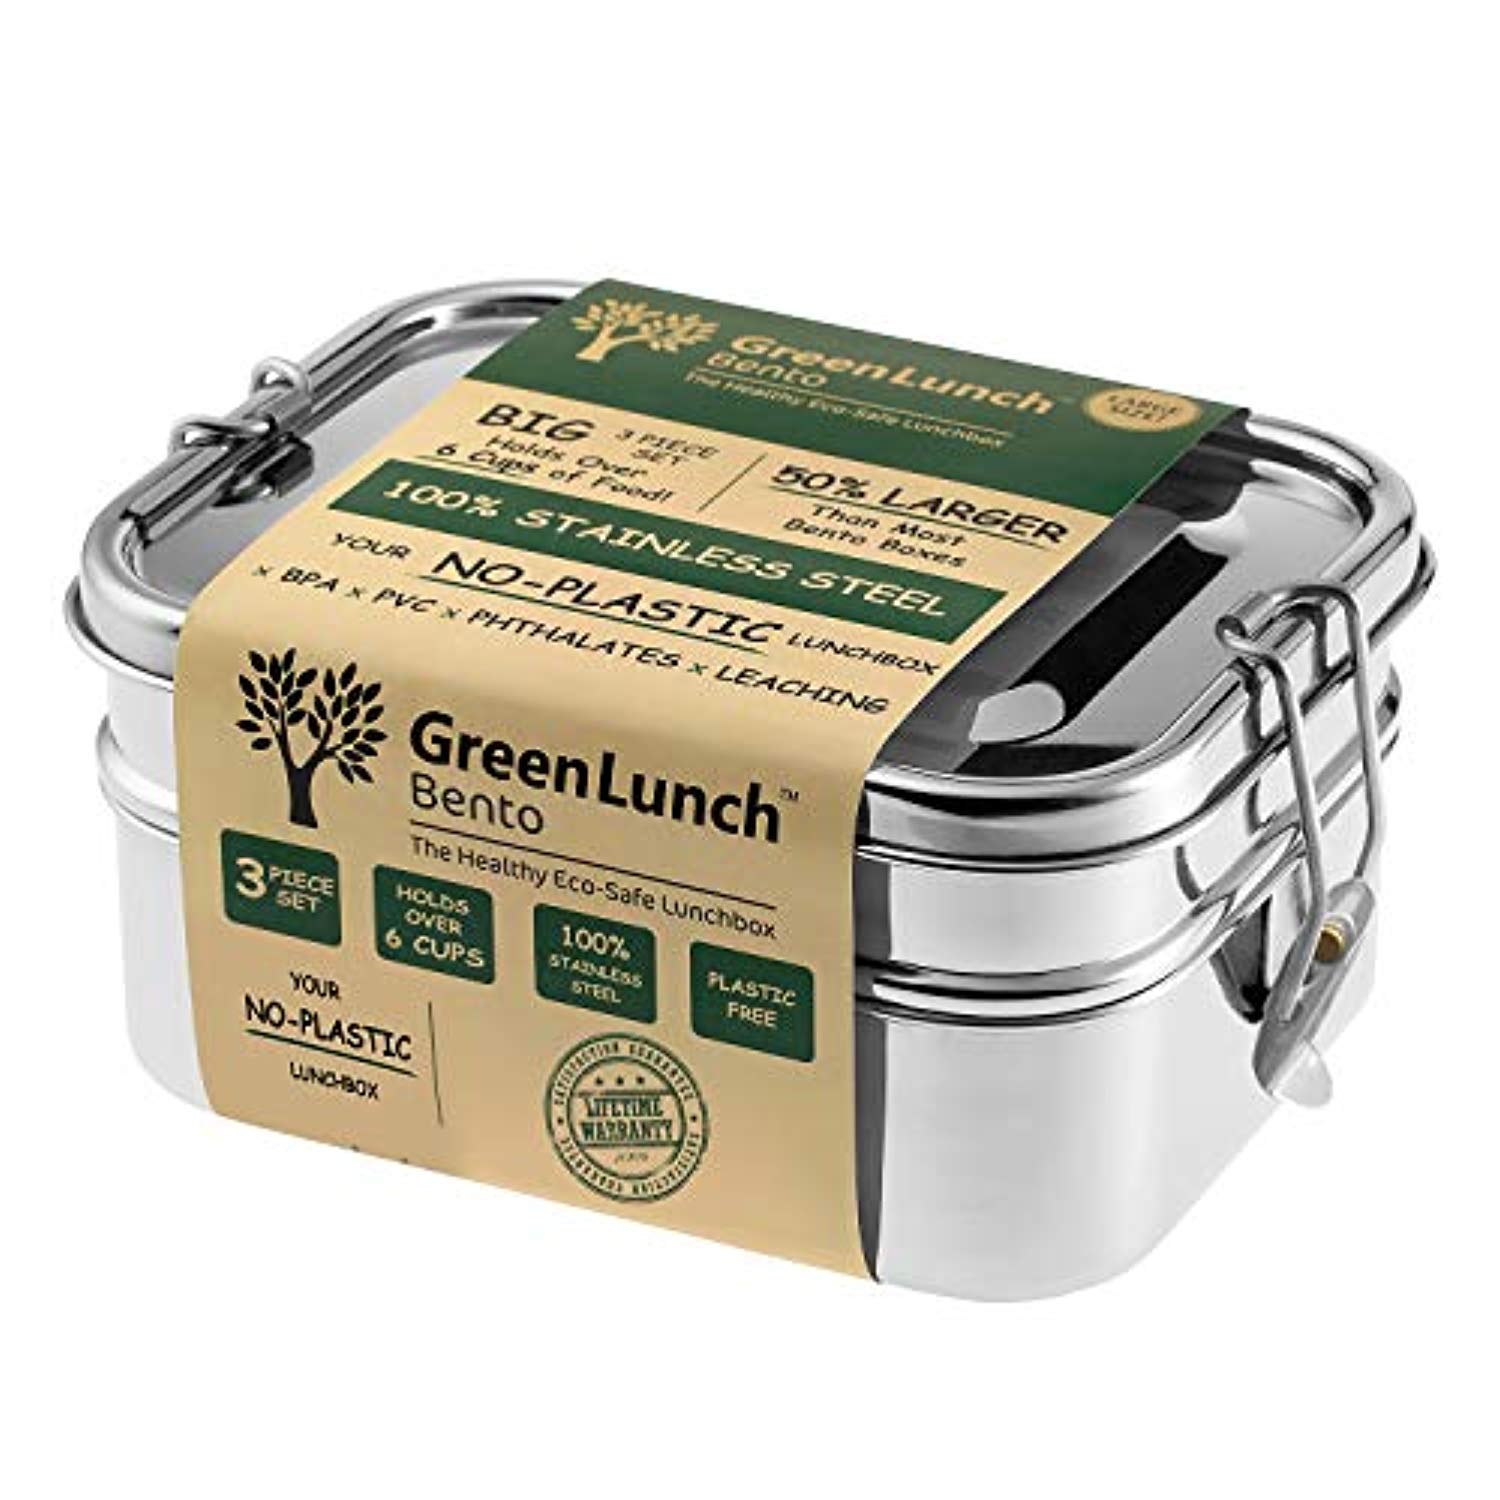 Stainless Steel Eco Lunch Box